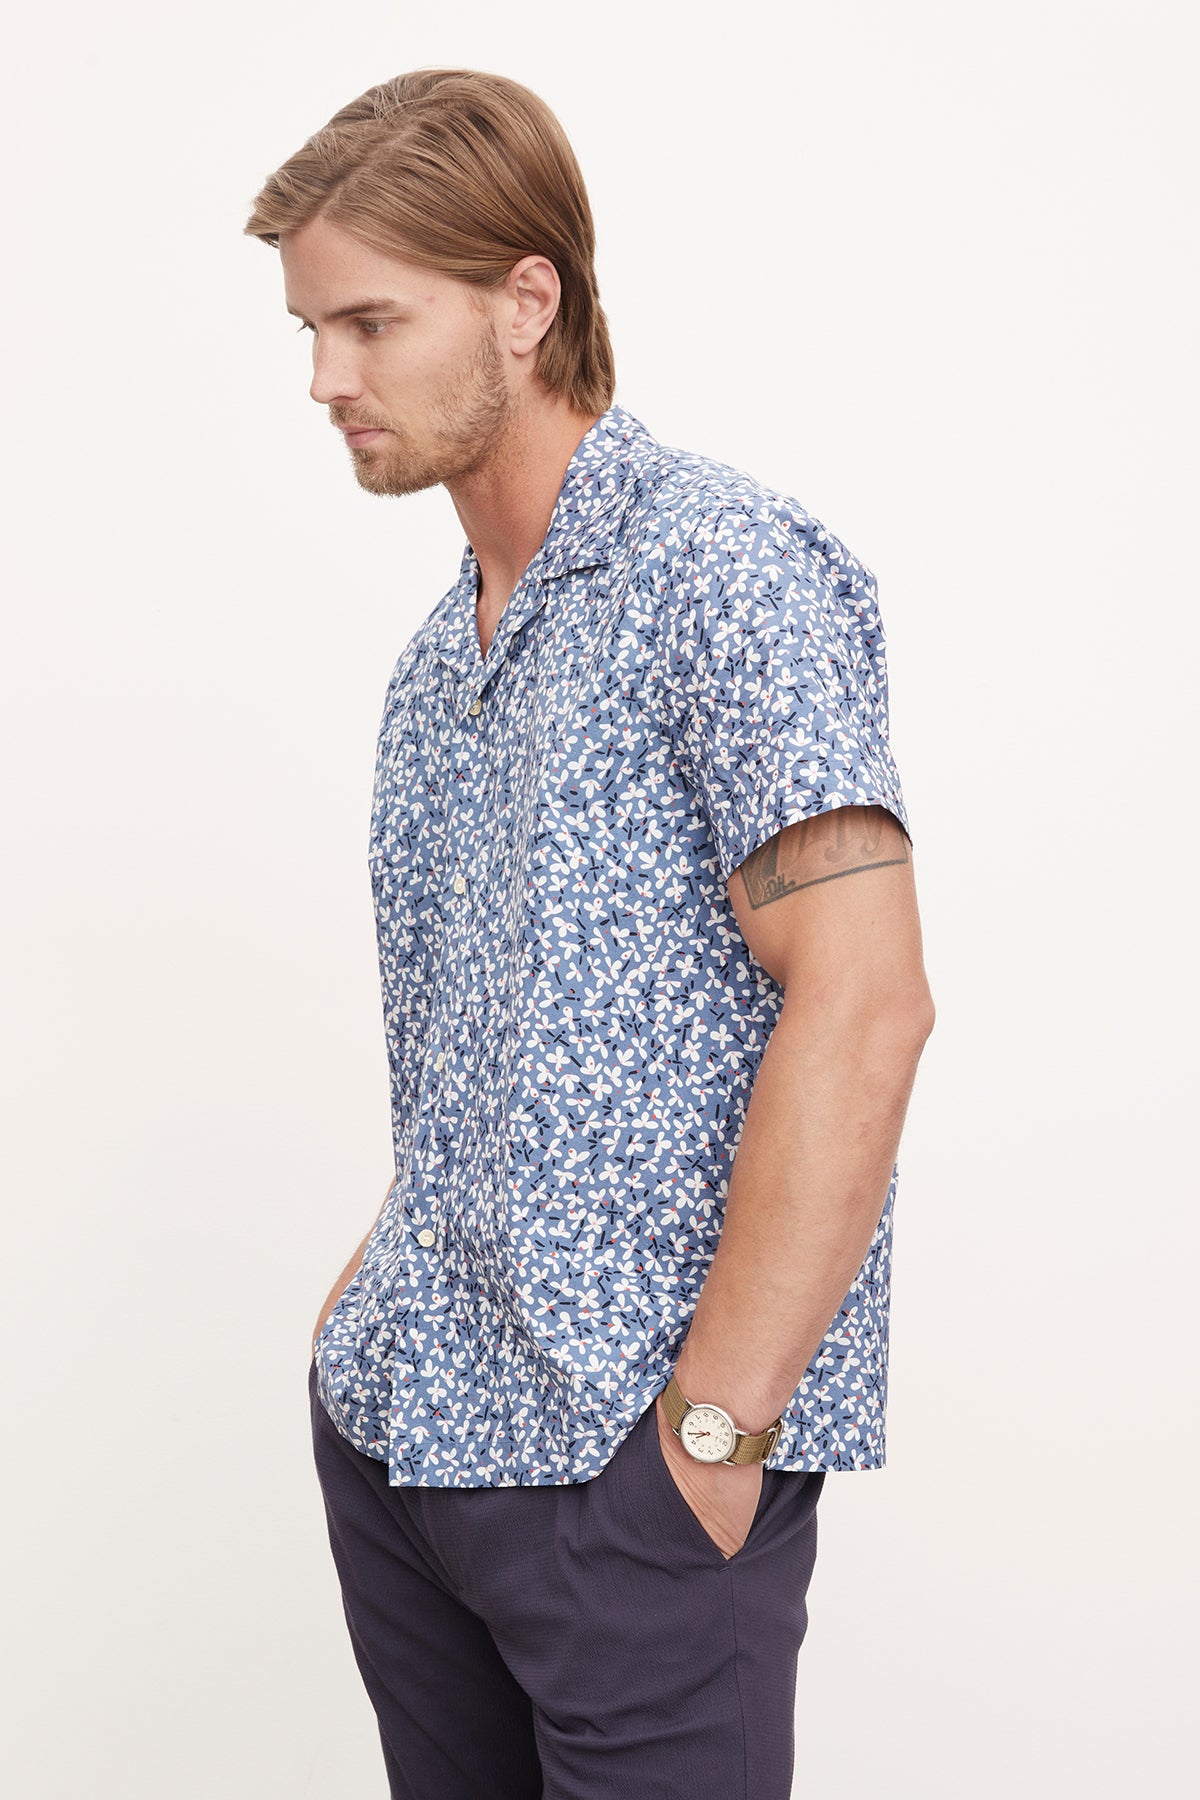   Man in a blue and white floral print Iggy button-up shirt by Velvet by Graham & Spencer and navy trousers, standing sideways, looking to the left with a watch on his wrist. 